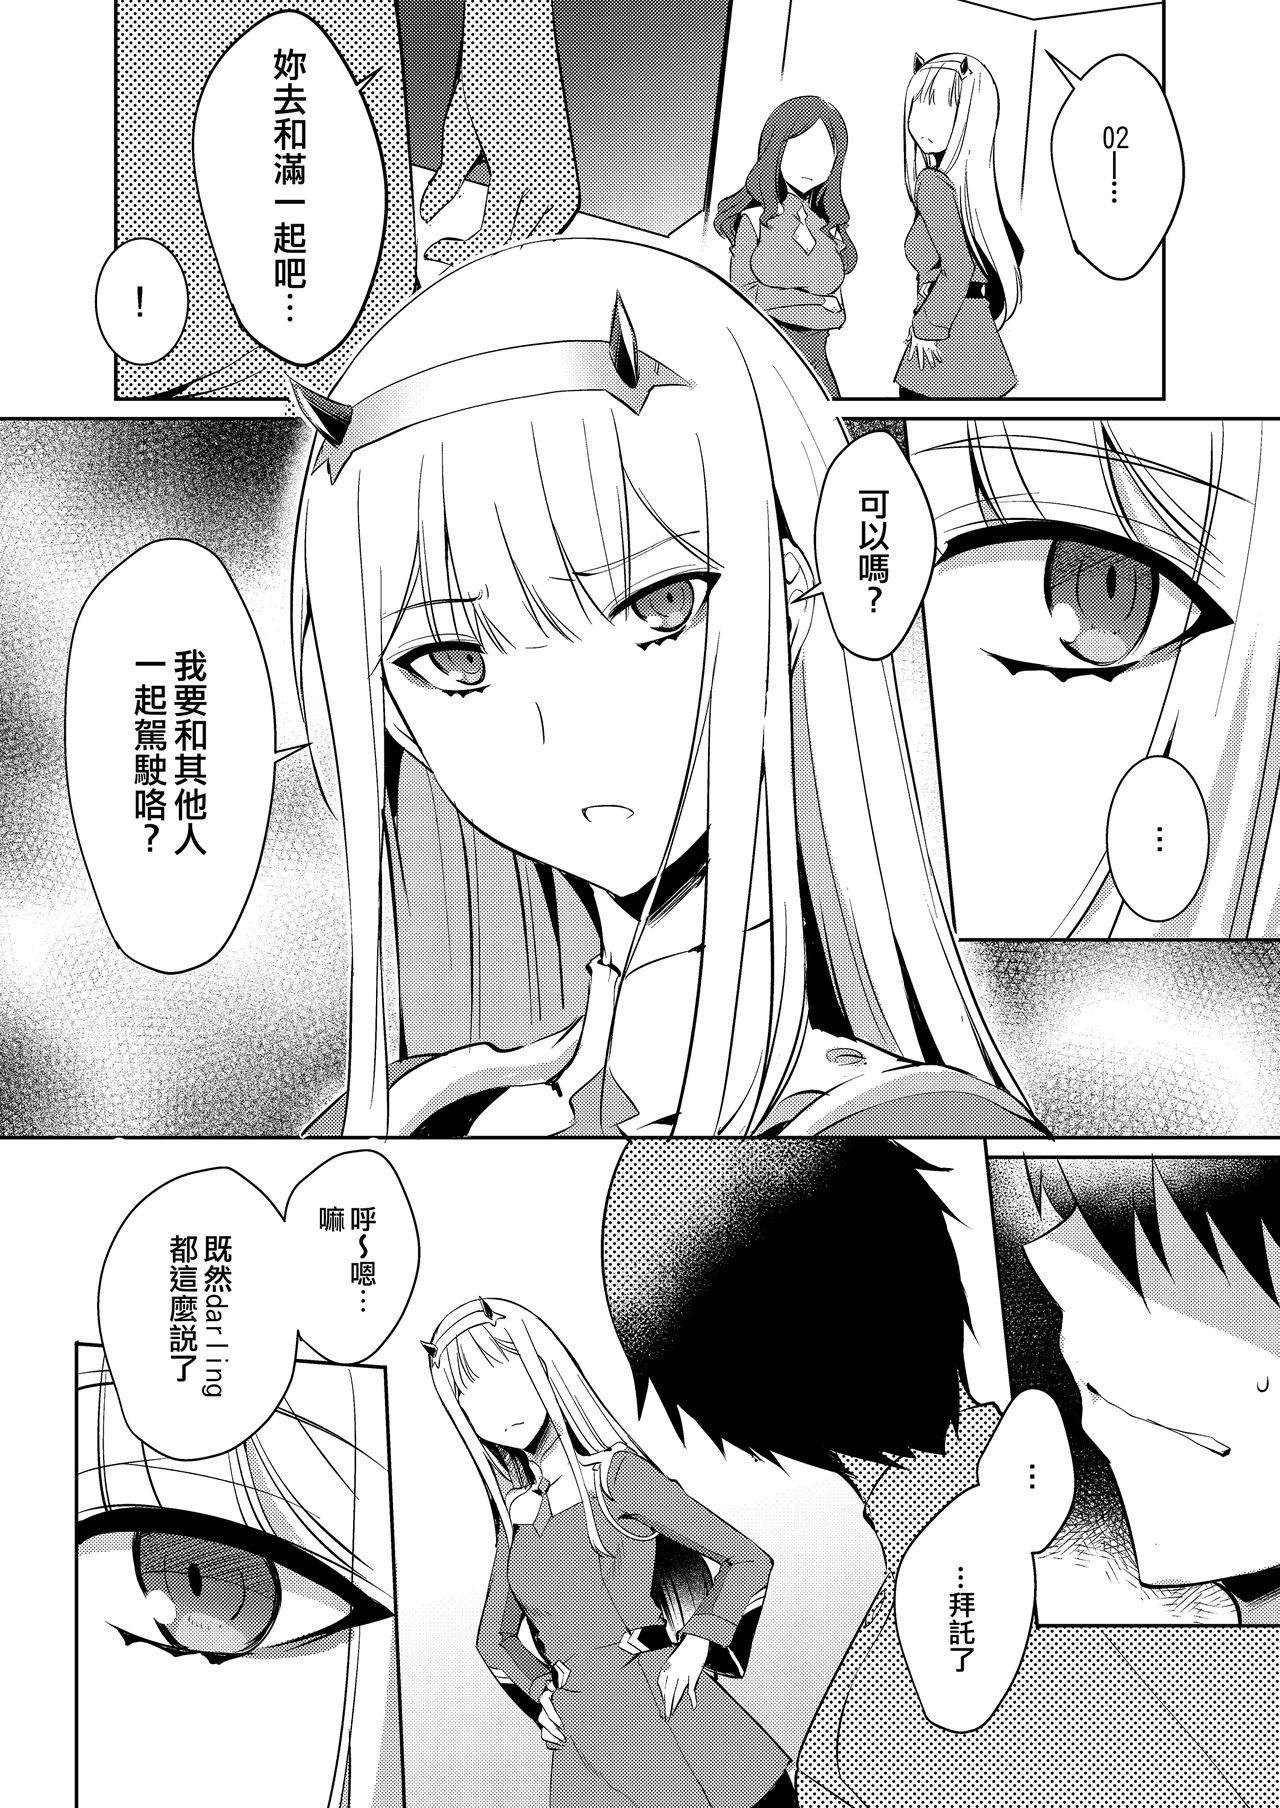 Colombiana Mitsuru in the Zero Two - Darling in the franxx Gay Bondage - Page 7